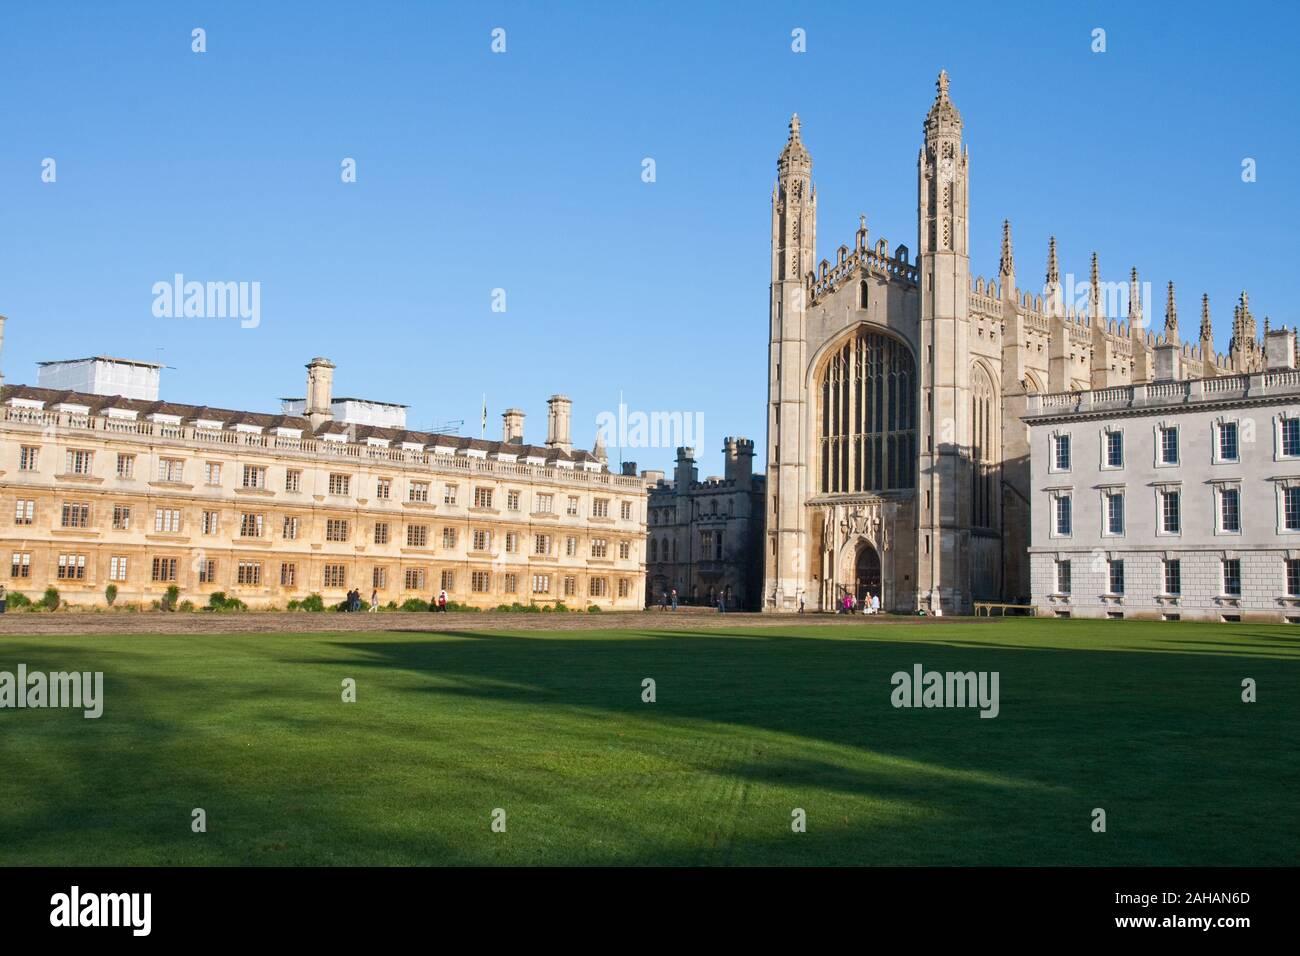 A view across the lawn towards Clare College, King's College Chapel and the Gibbs Building in Cambridge Stock Photo